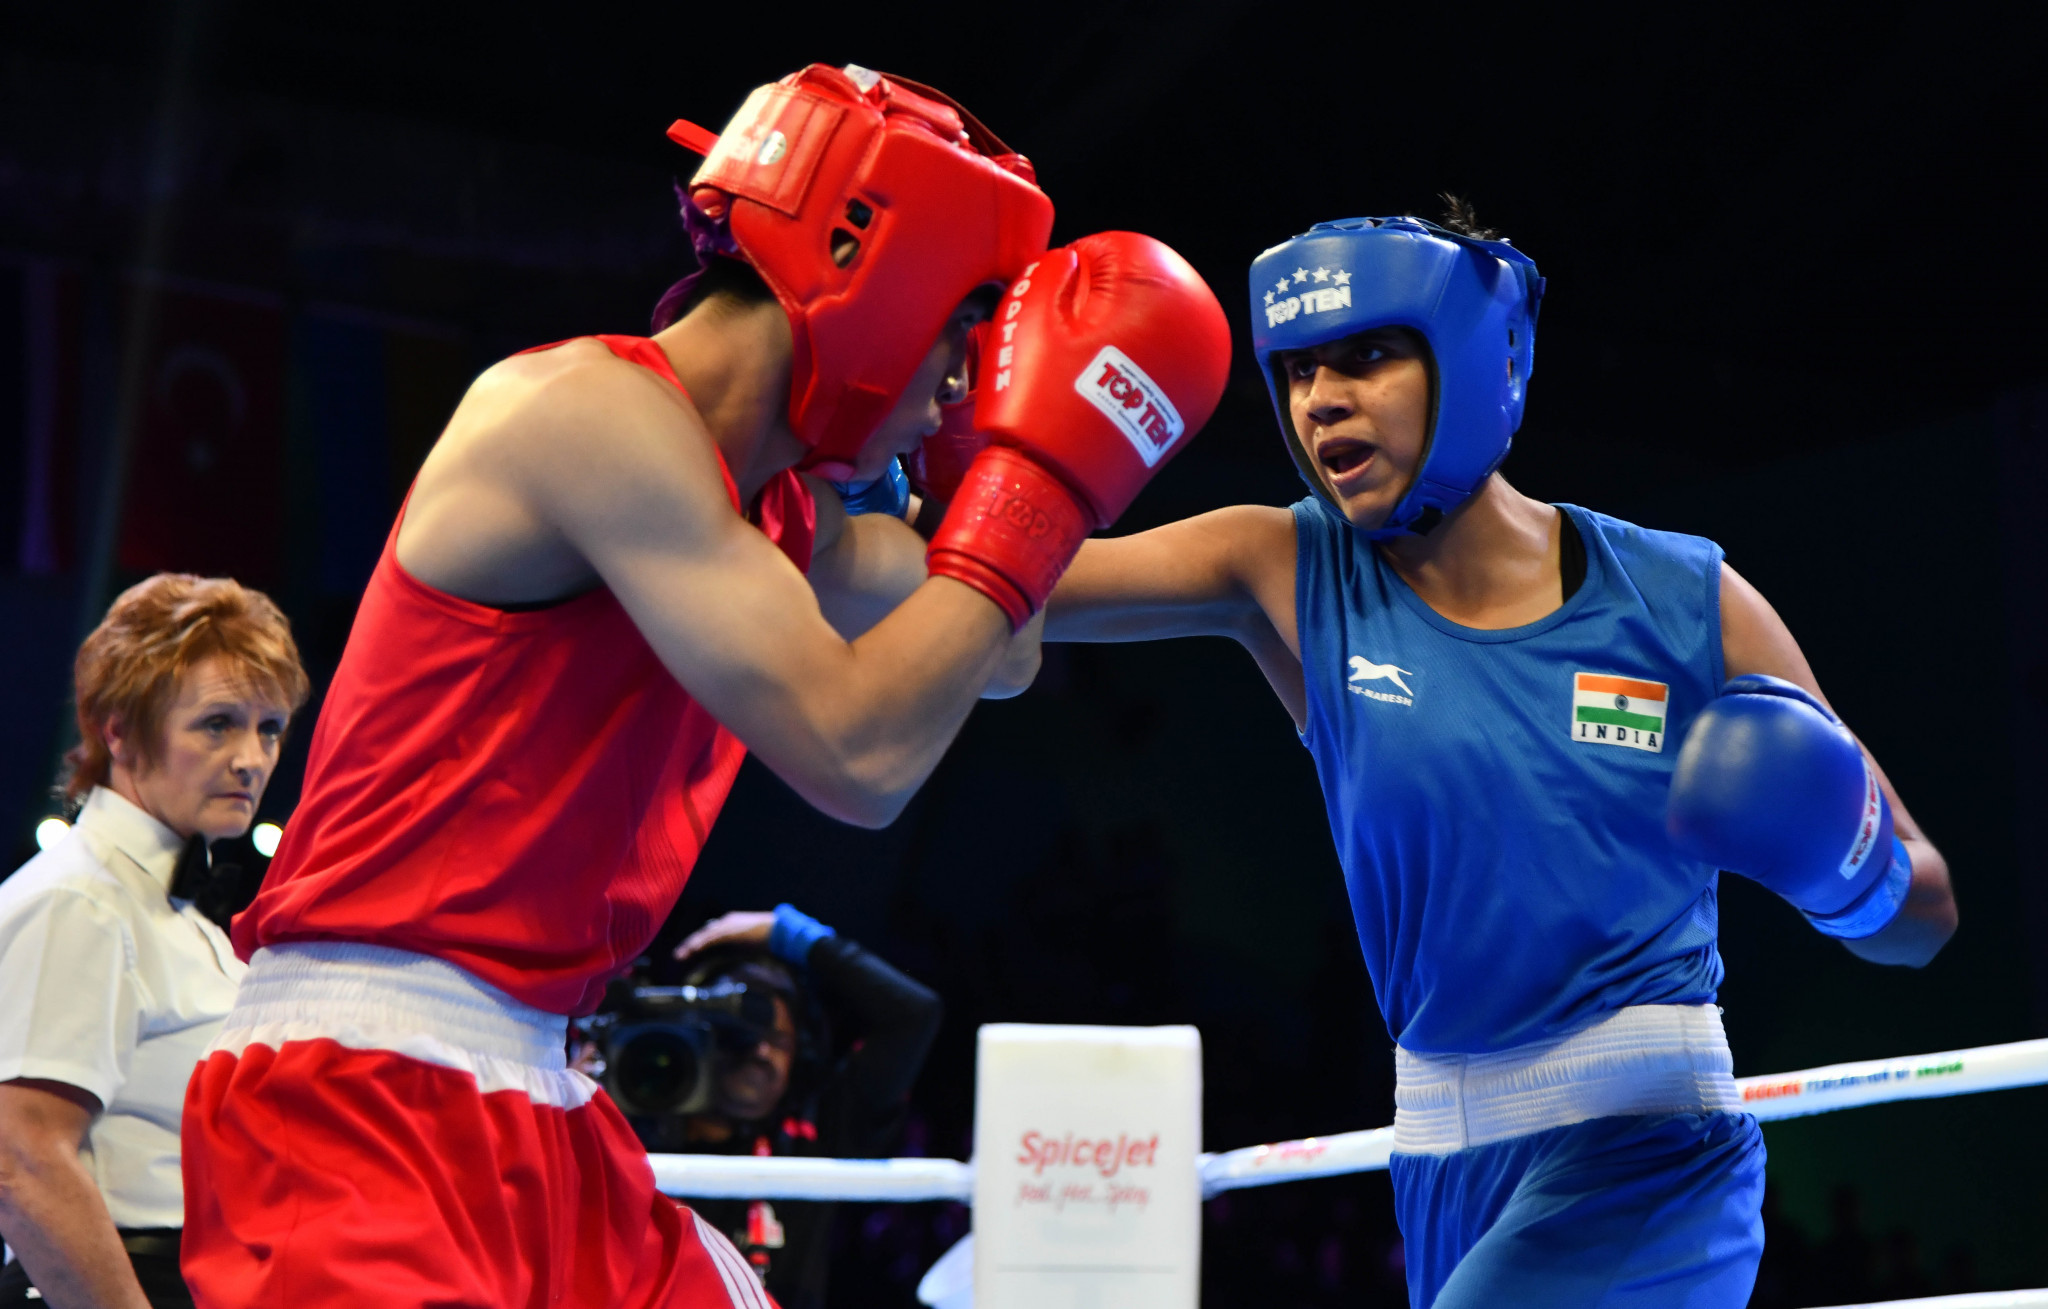 The governance row had plagued the sport of boxing in India ©Getty Images